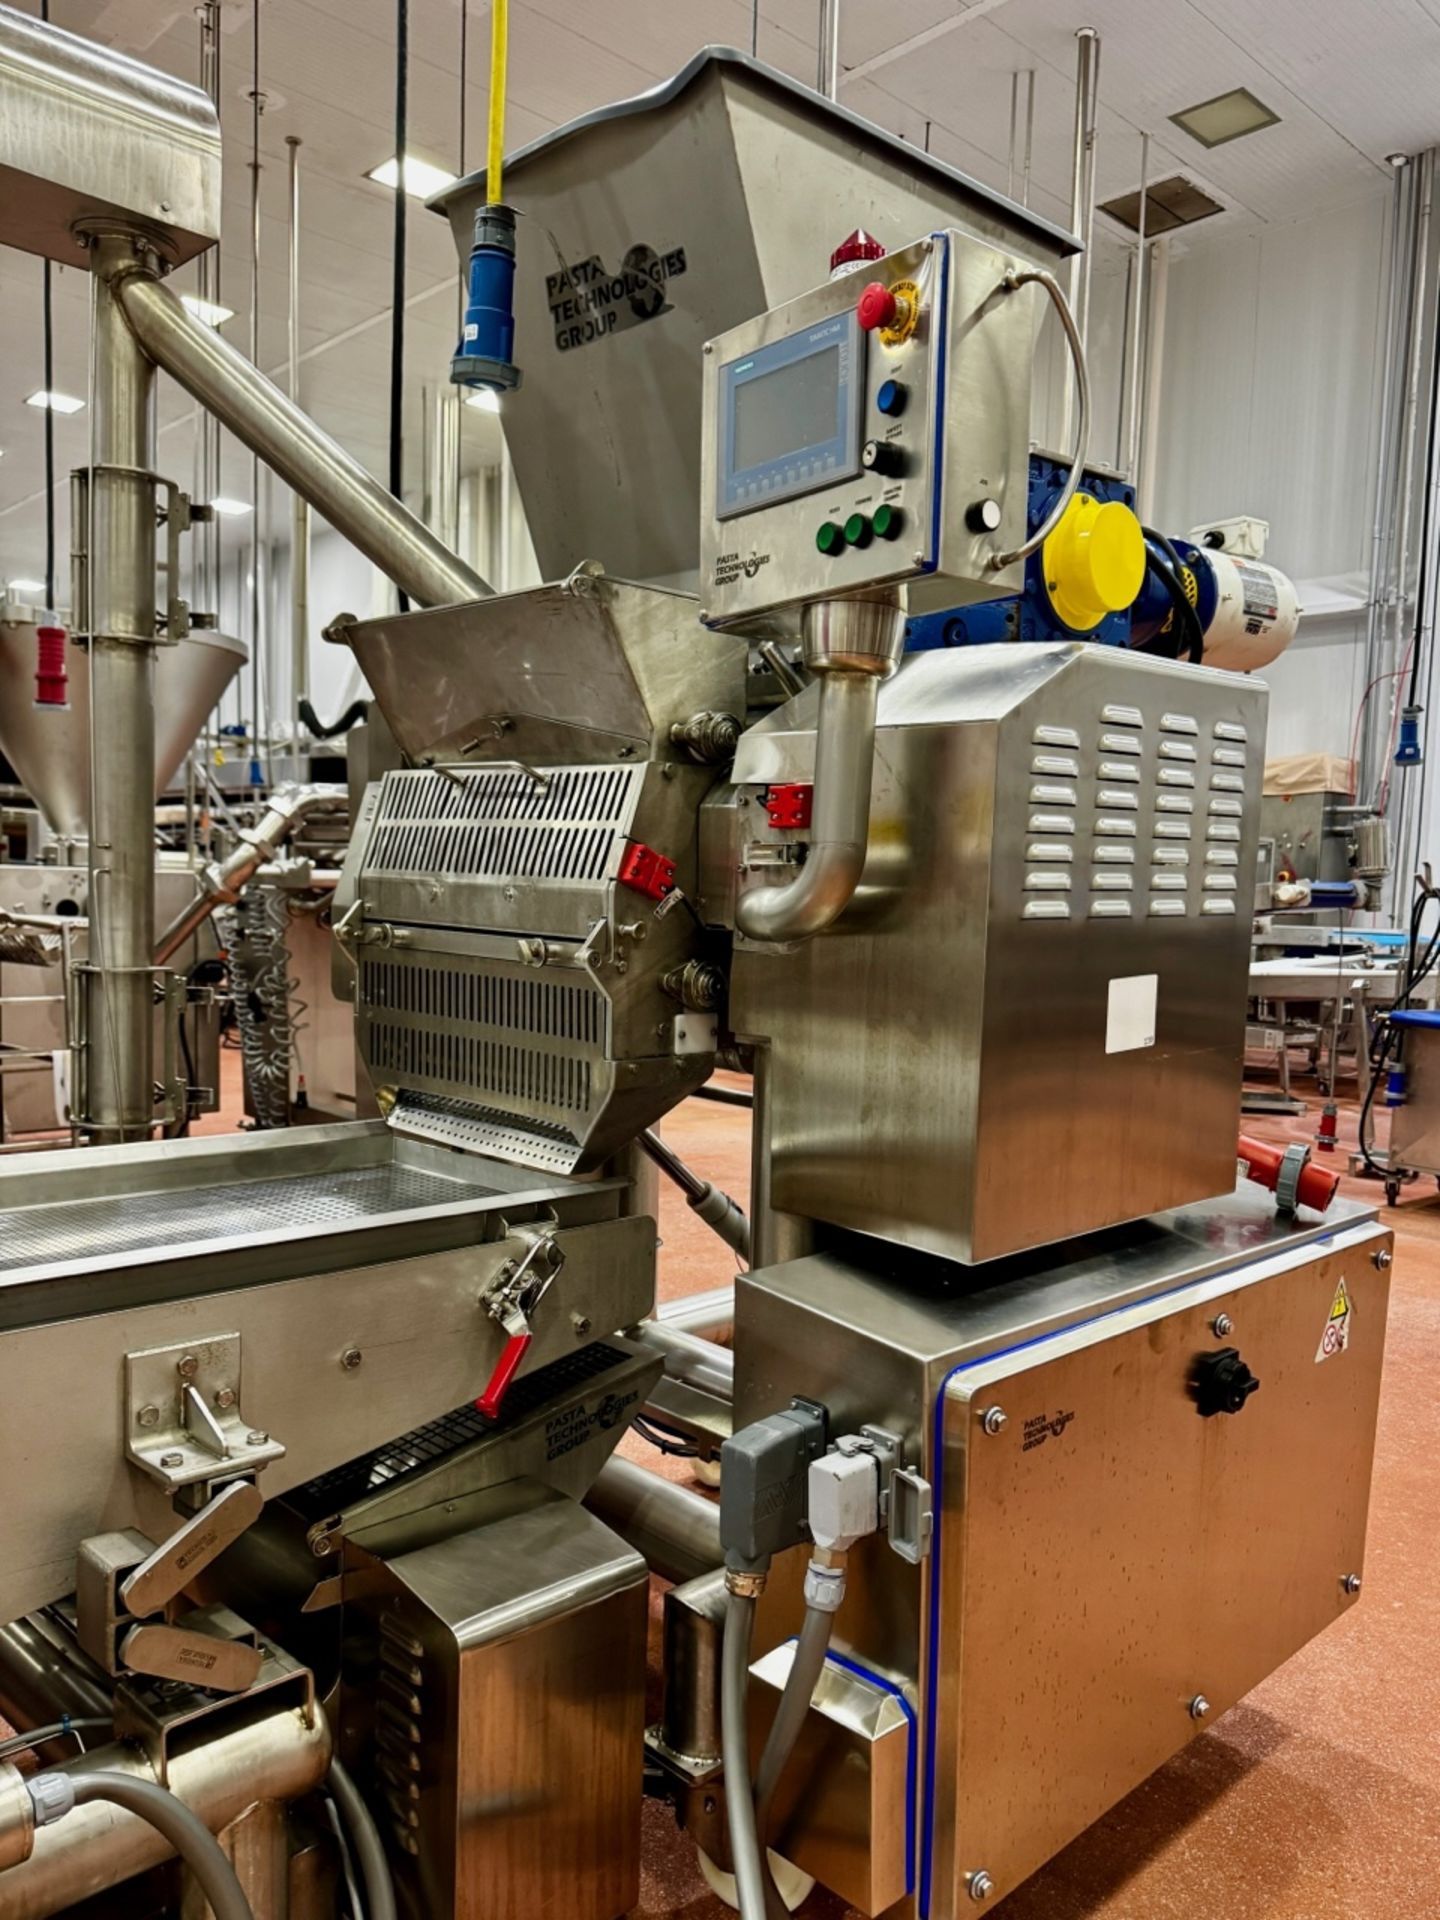 2022 Pasta Technologies GN16 Gnocchi Former & Vibratory Conveyor, S/N C083901A20 - Image 2 of 4